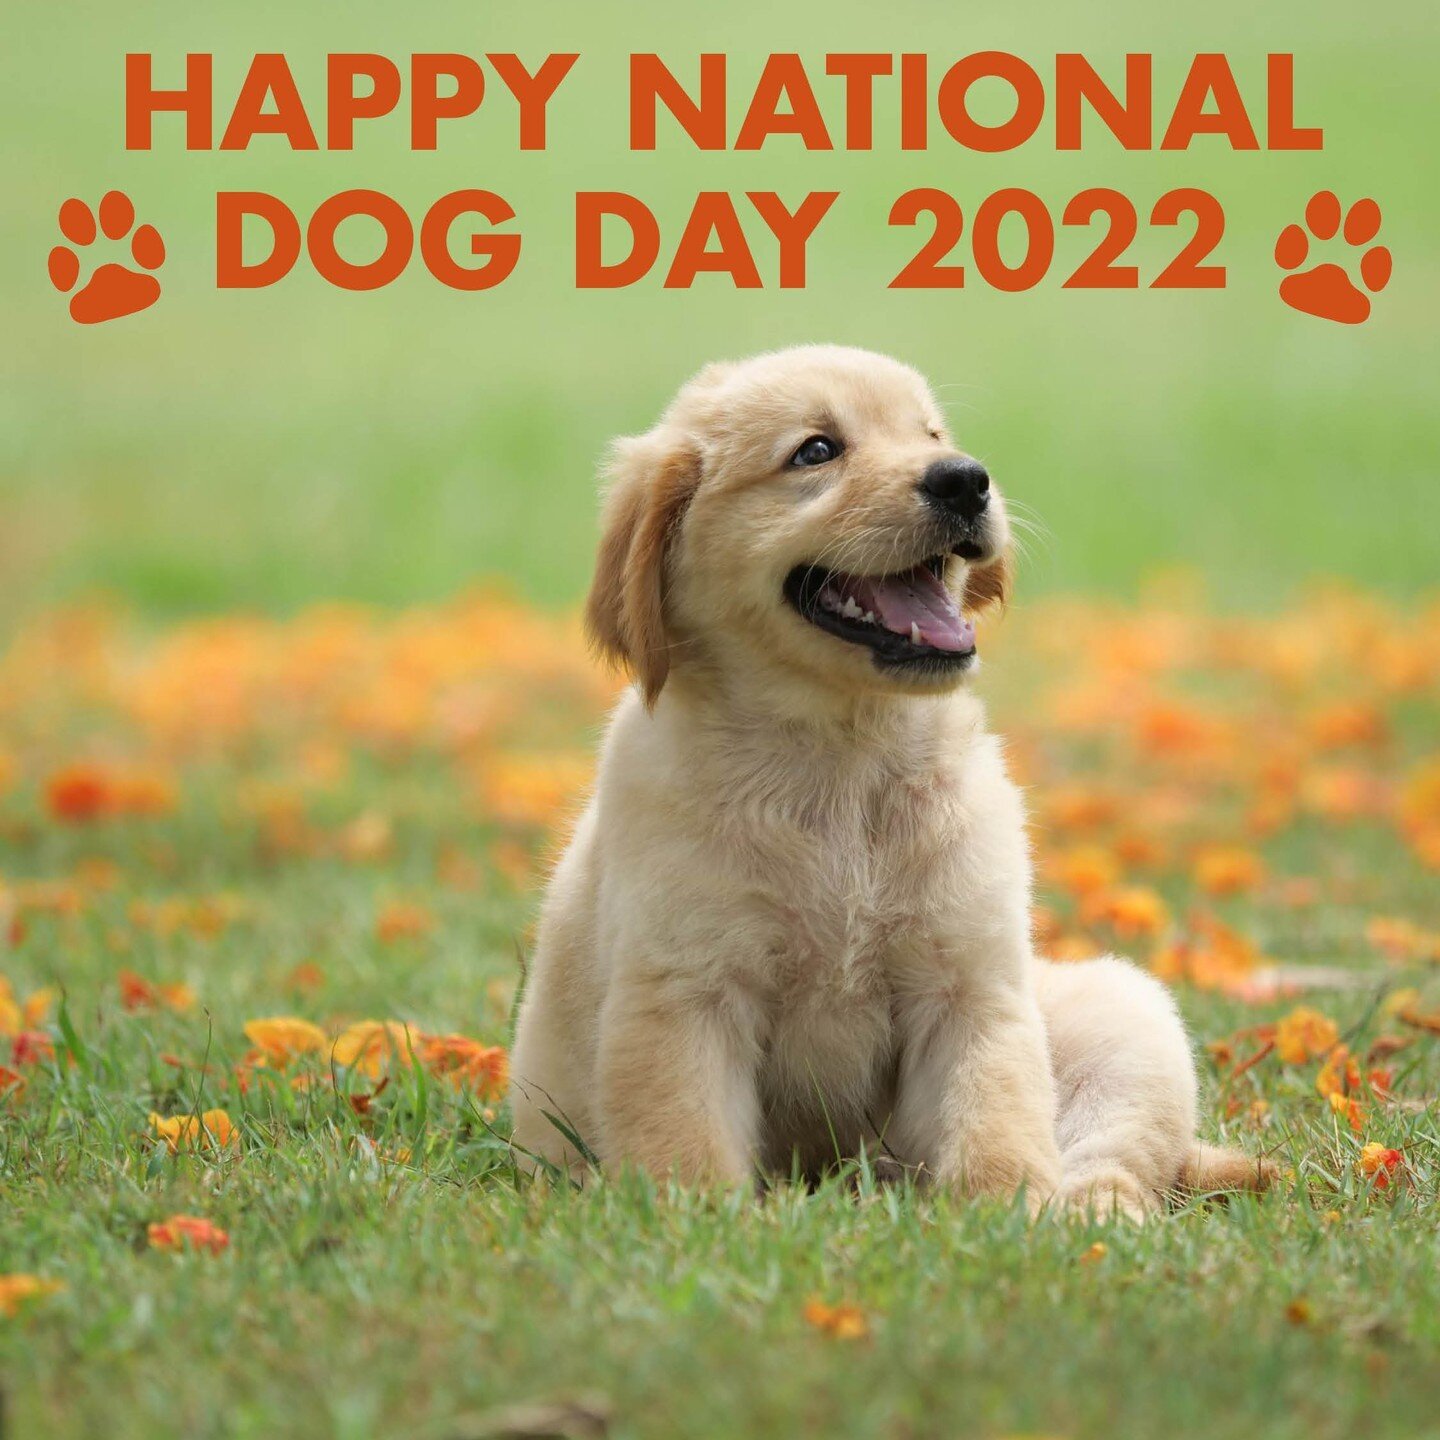 Residents! Today is National Dog Day! Celebrate with us by posting a picture of your pooch in the comments below - and include their name and breed! We can't wait to see everyone's doggies. 🐶 Think your dog is the cutest? Let us know below. #nationa